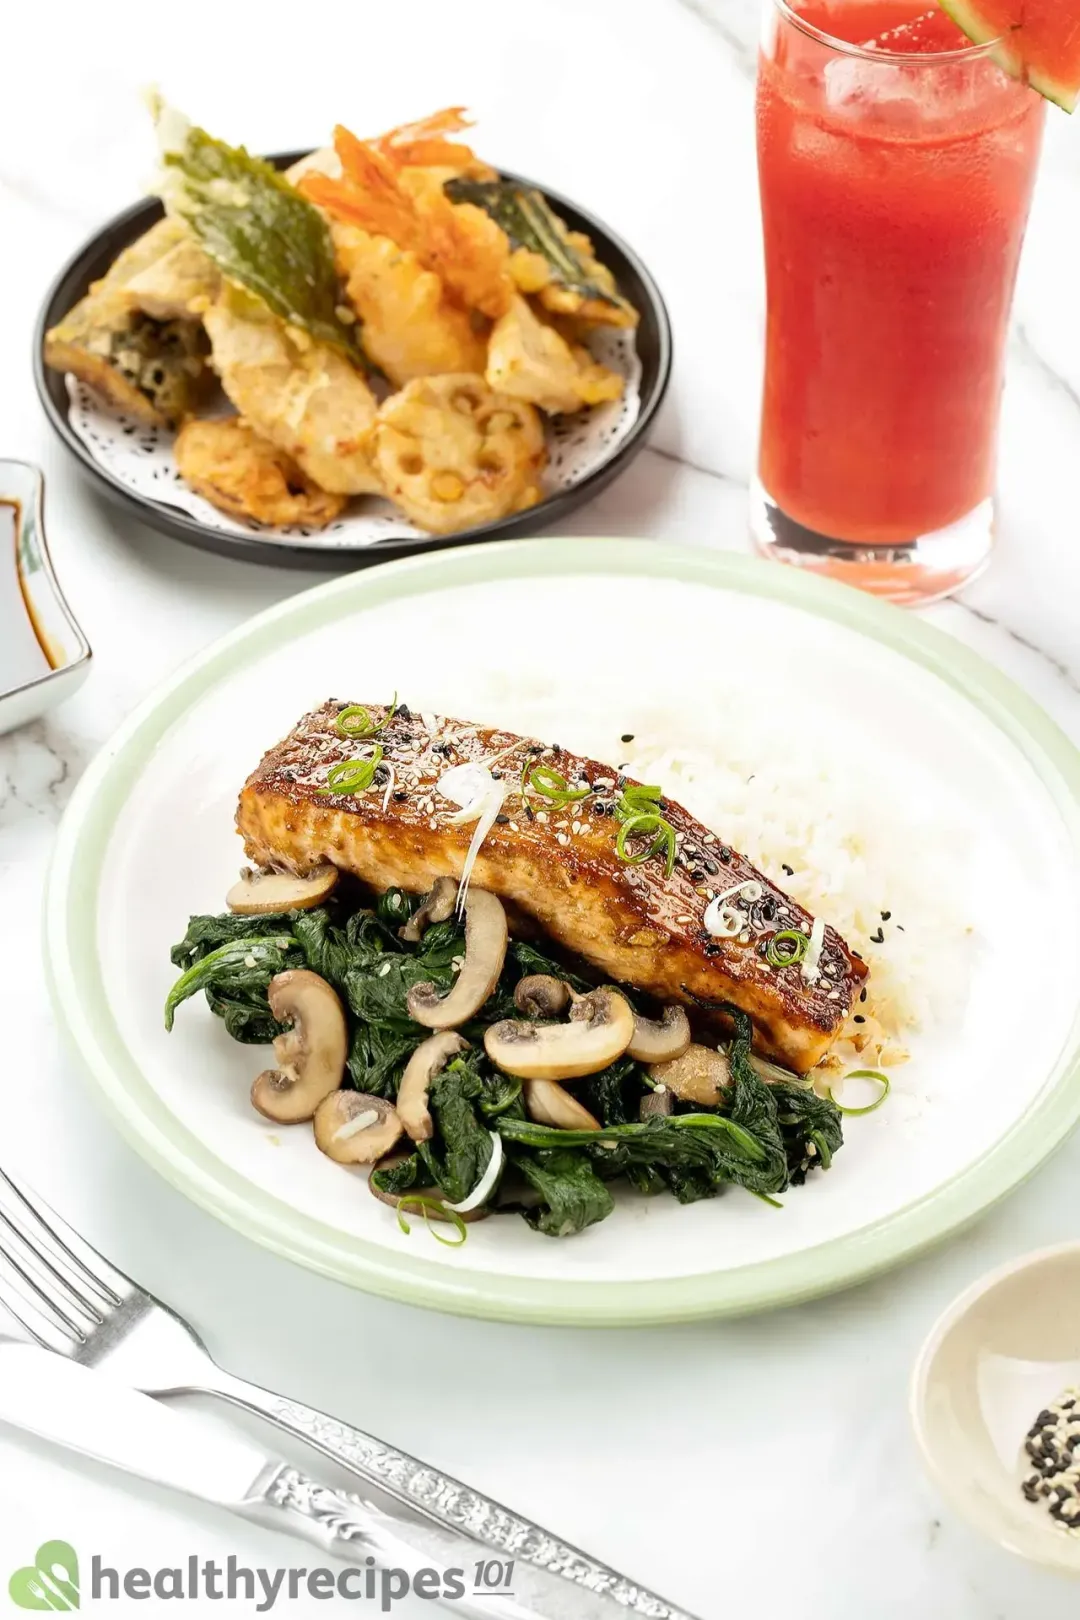 A plate containing a piece of miso-glazed salmon served alongside white rice, cooked mushrooms, and cooked spinach laid next to watermelon juice and tempura vegetables